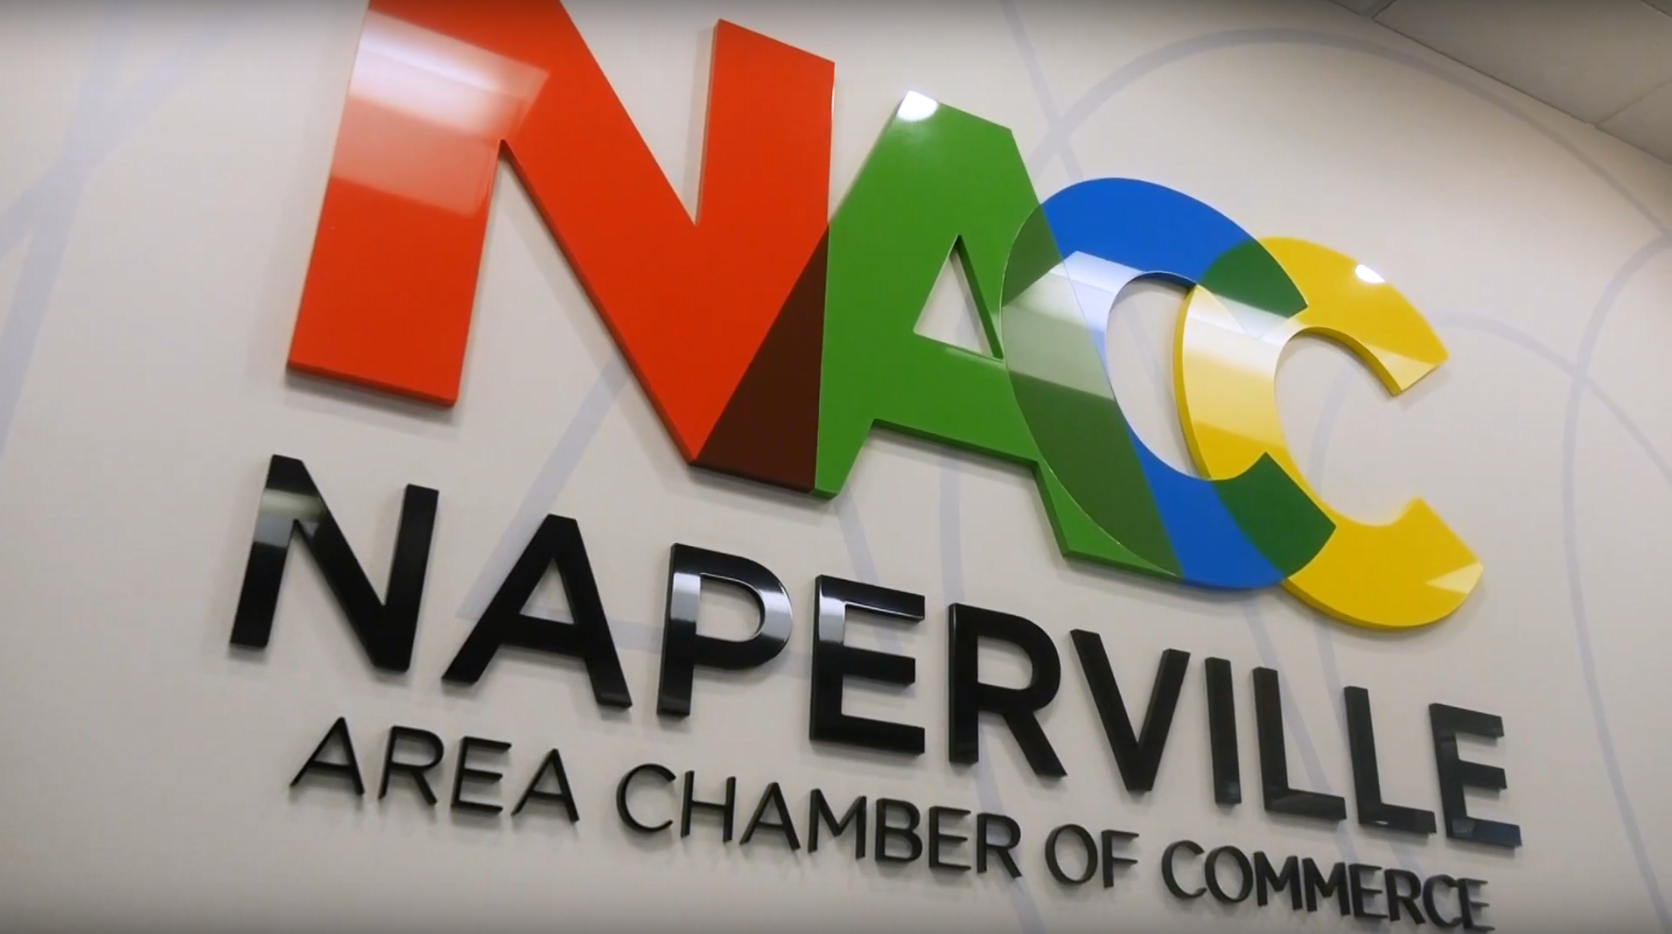 Naperville chamber wall logo.png